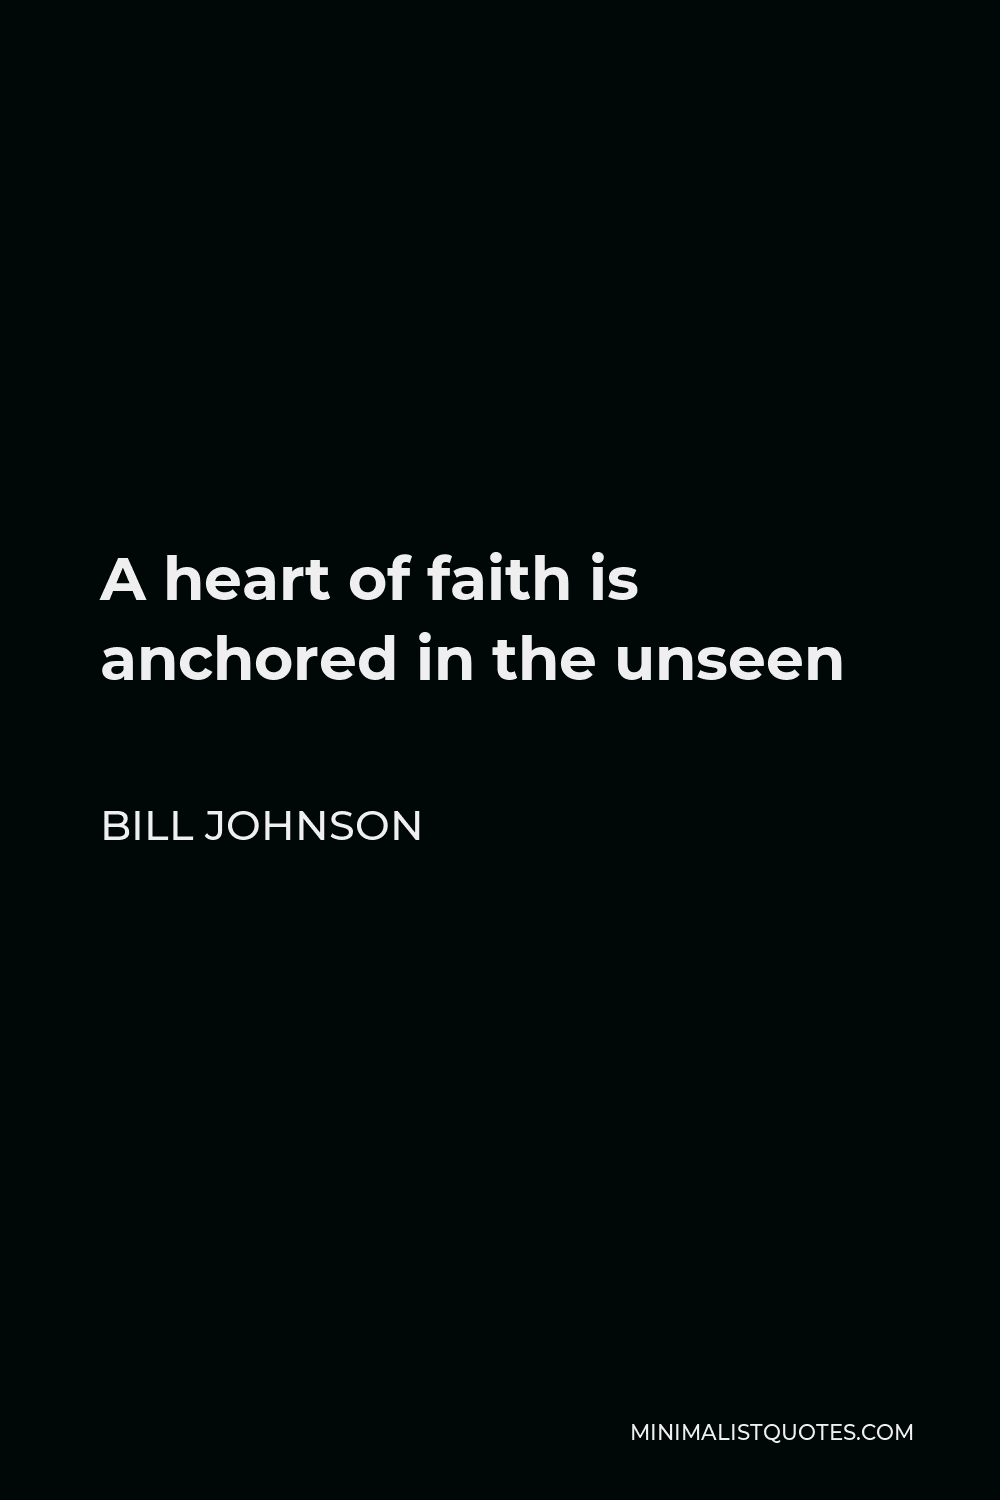 Bill Johnson Quote: “A heart of faith is anchored in the unseen.”